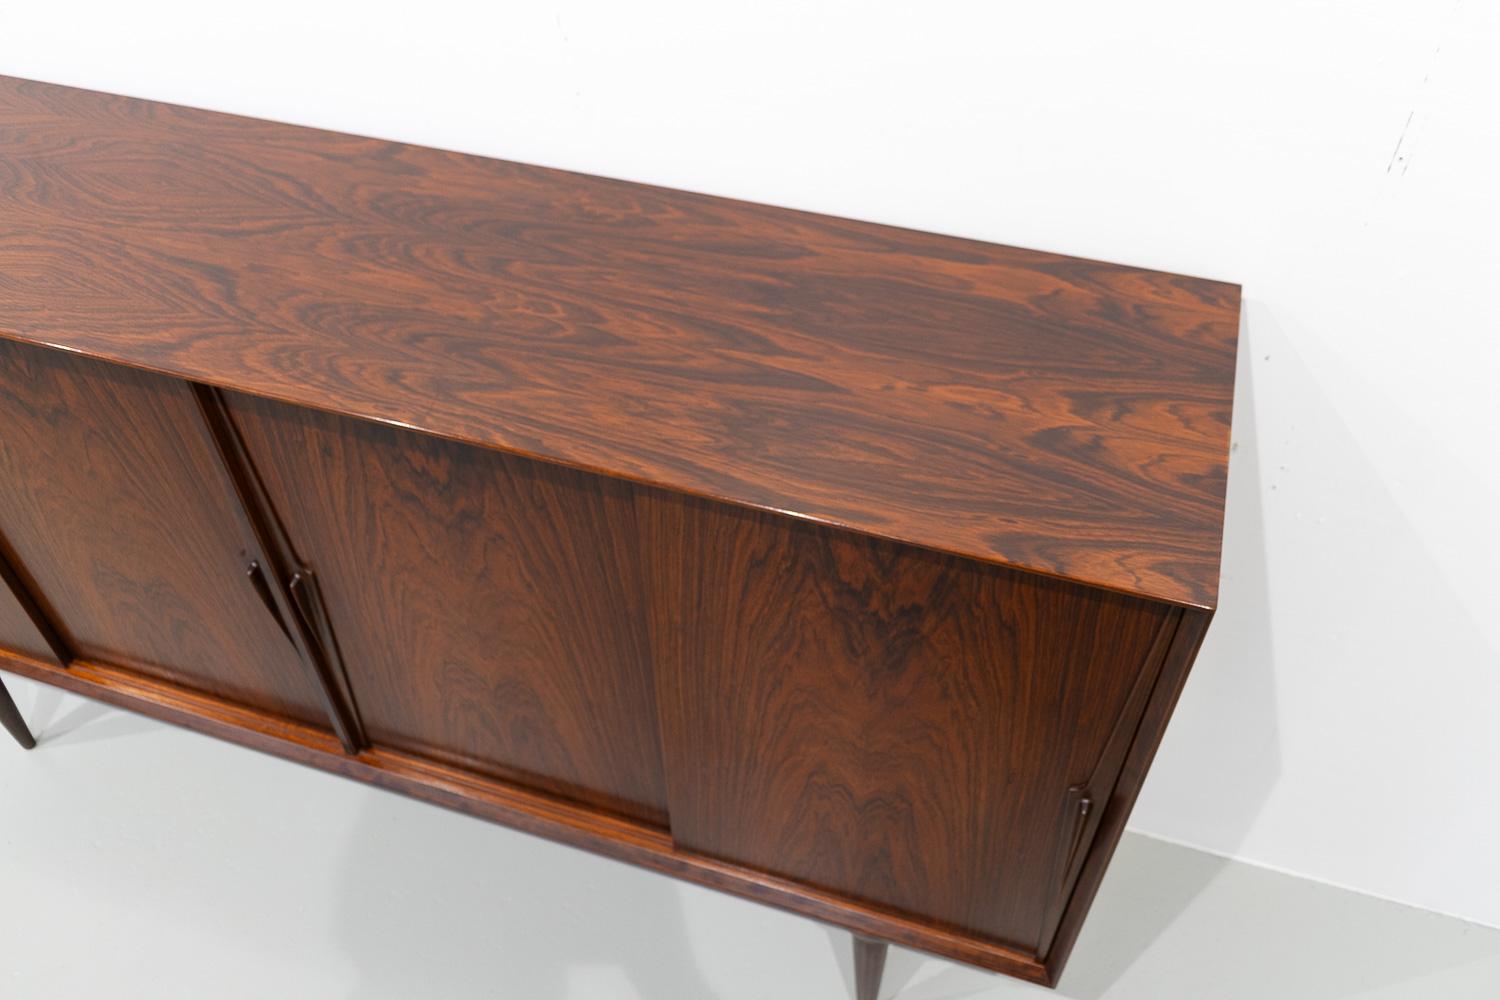 Vintage Danish Rosewood Credenza by Gunni Omann for Omann Jun, 1960s For Sale 6